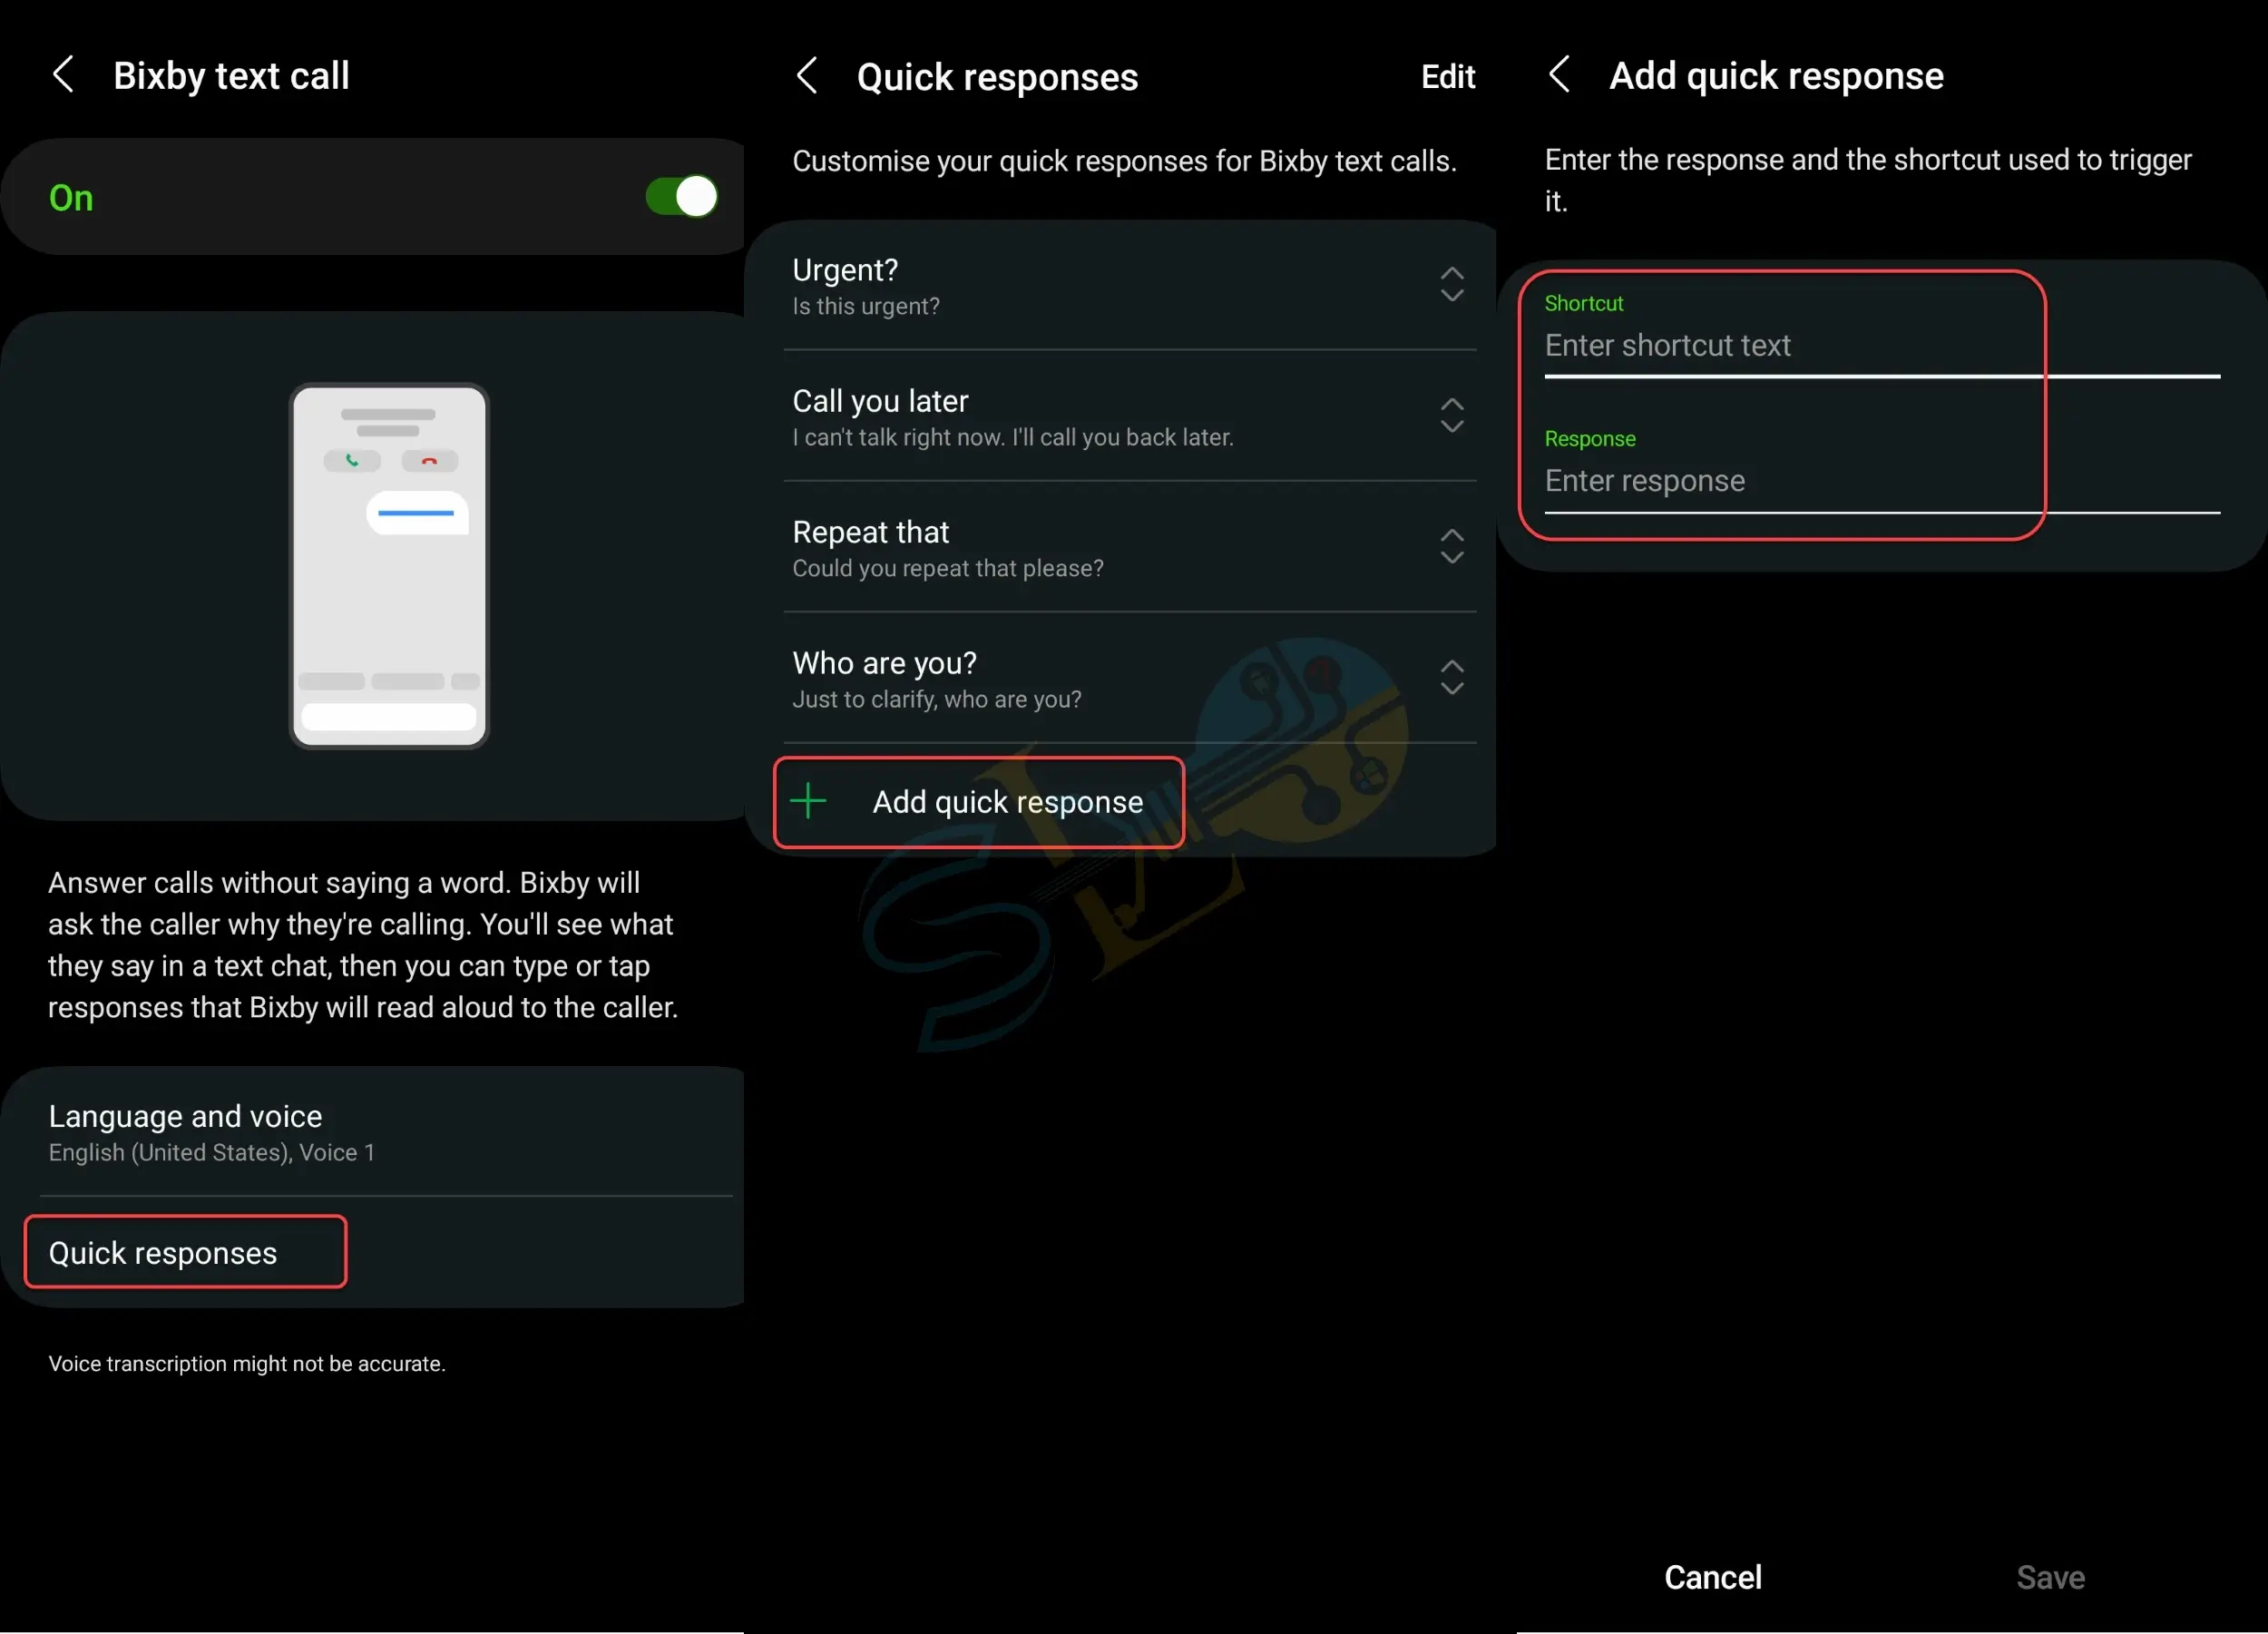 Samsung Bixby Text Call One UI 5.1: How to Enable it with English